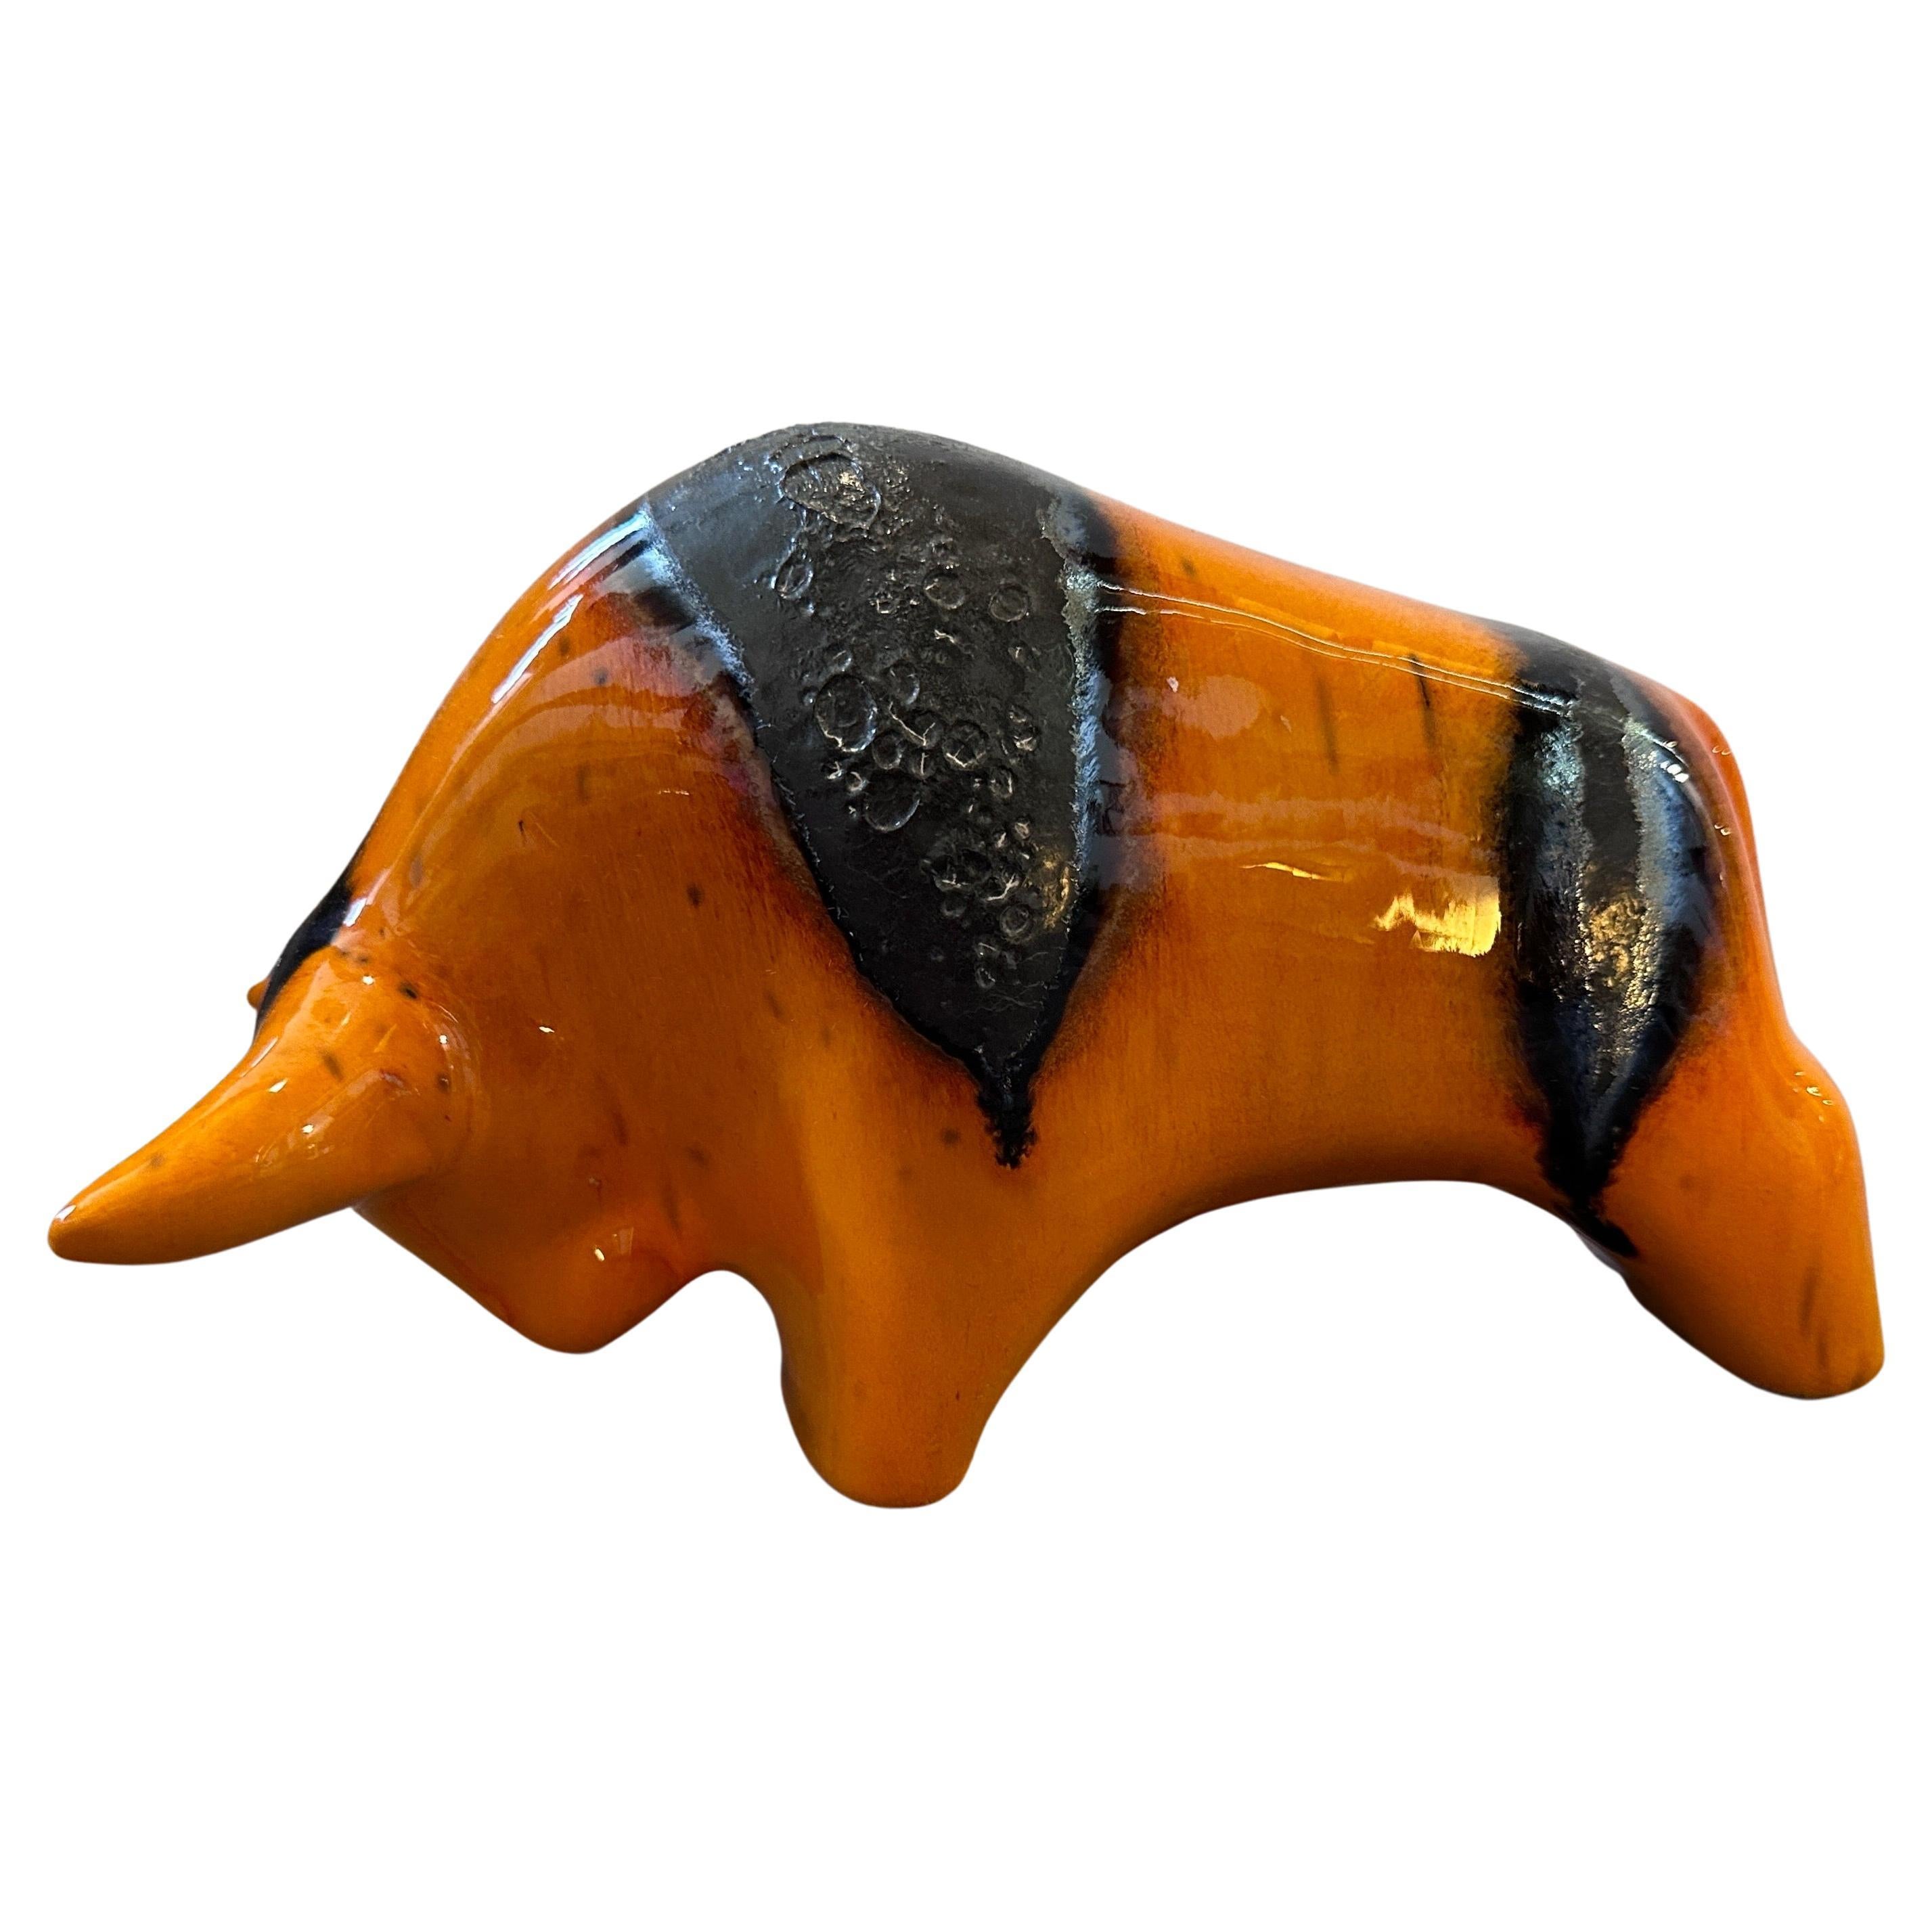 This Ceramic Bull by Otto Keramik is a striking and unique piece of ceramic art that epitomizes the design aesthetics of the era. Created by the renowned German pottery studio Otto Keramik, this sculpture showcases the boldness and creativity that